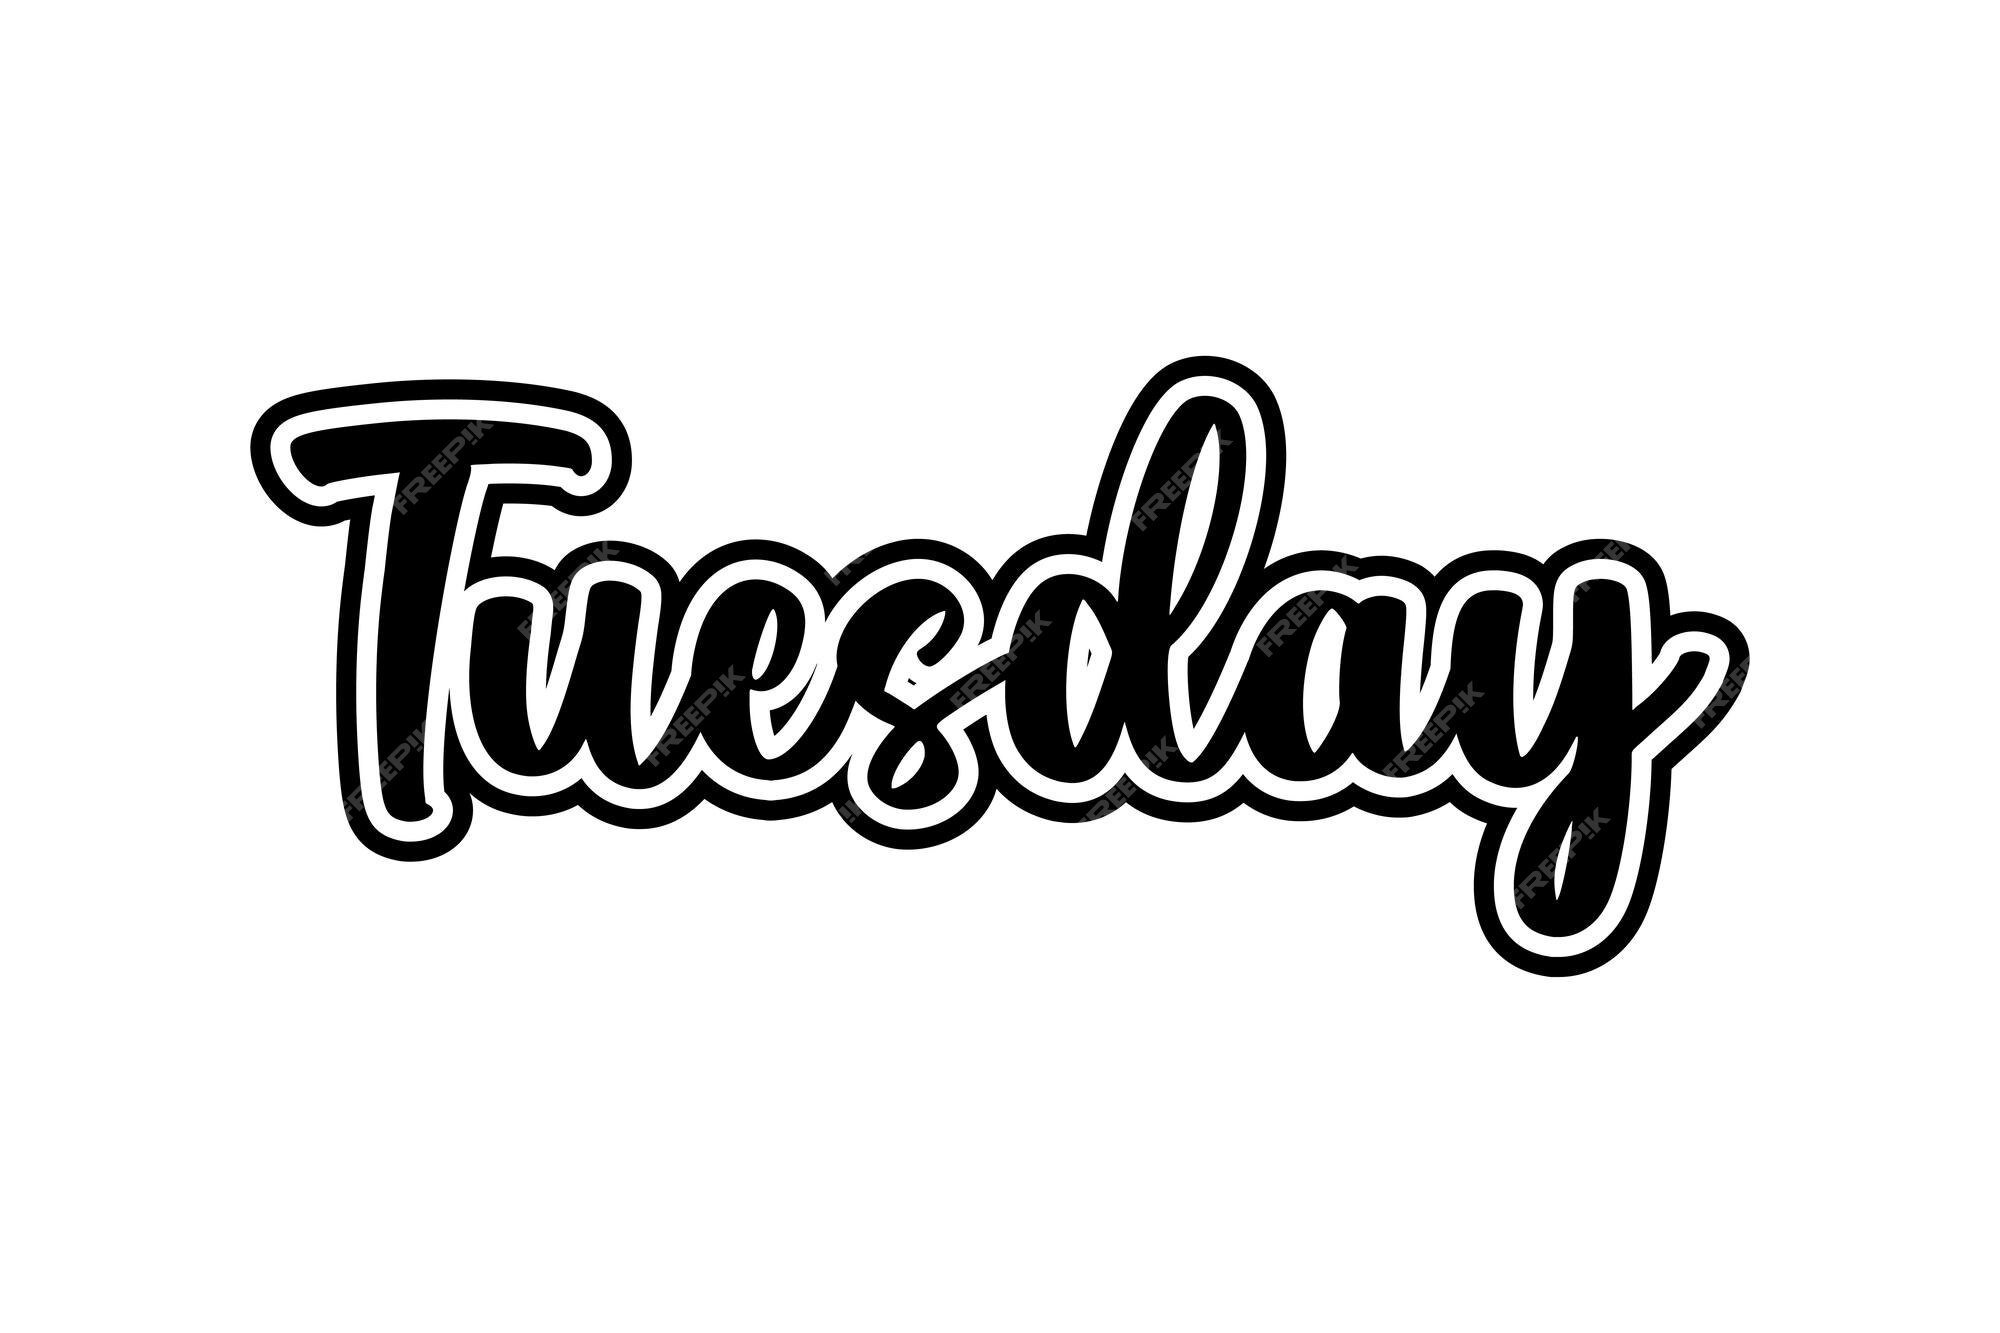 Tuesday PNG Picture, Tuesday Simple Handwritten, Hand Lettering, Hand  Drawn, Drawing PNG Image For Free Download